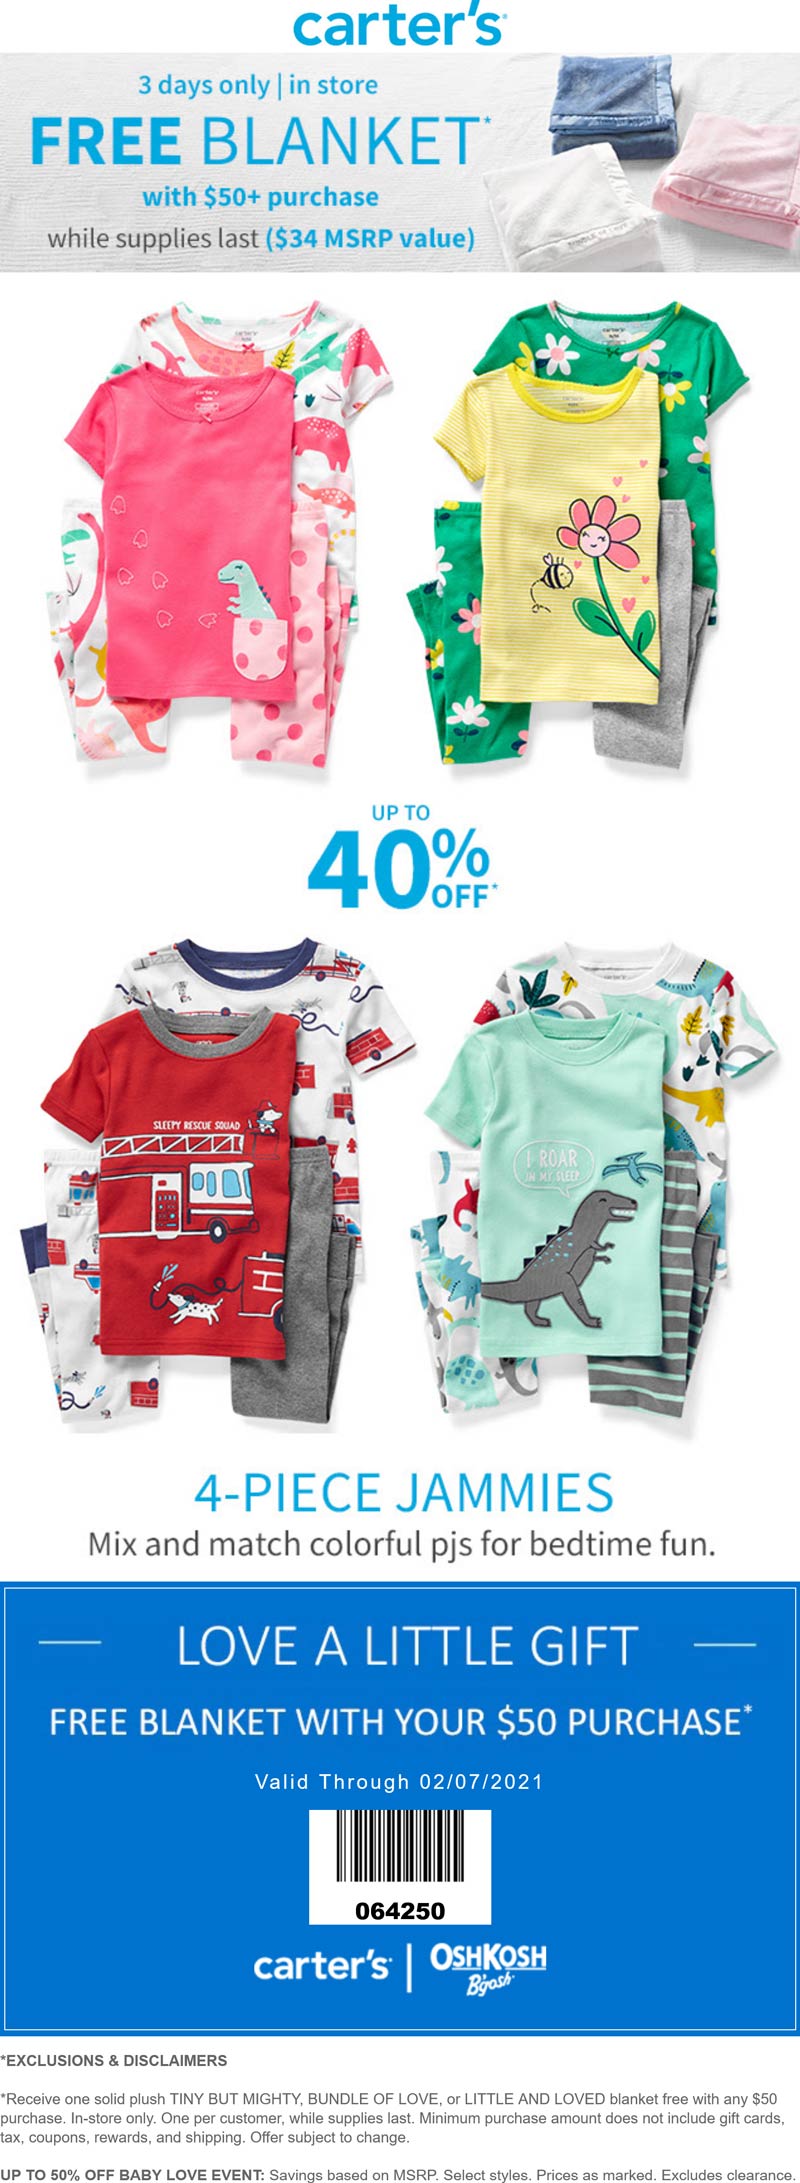 Carters stores Coupon  Free $35 blanket with $50 spent at Carters & OshKosh Bgosh #carters 